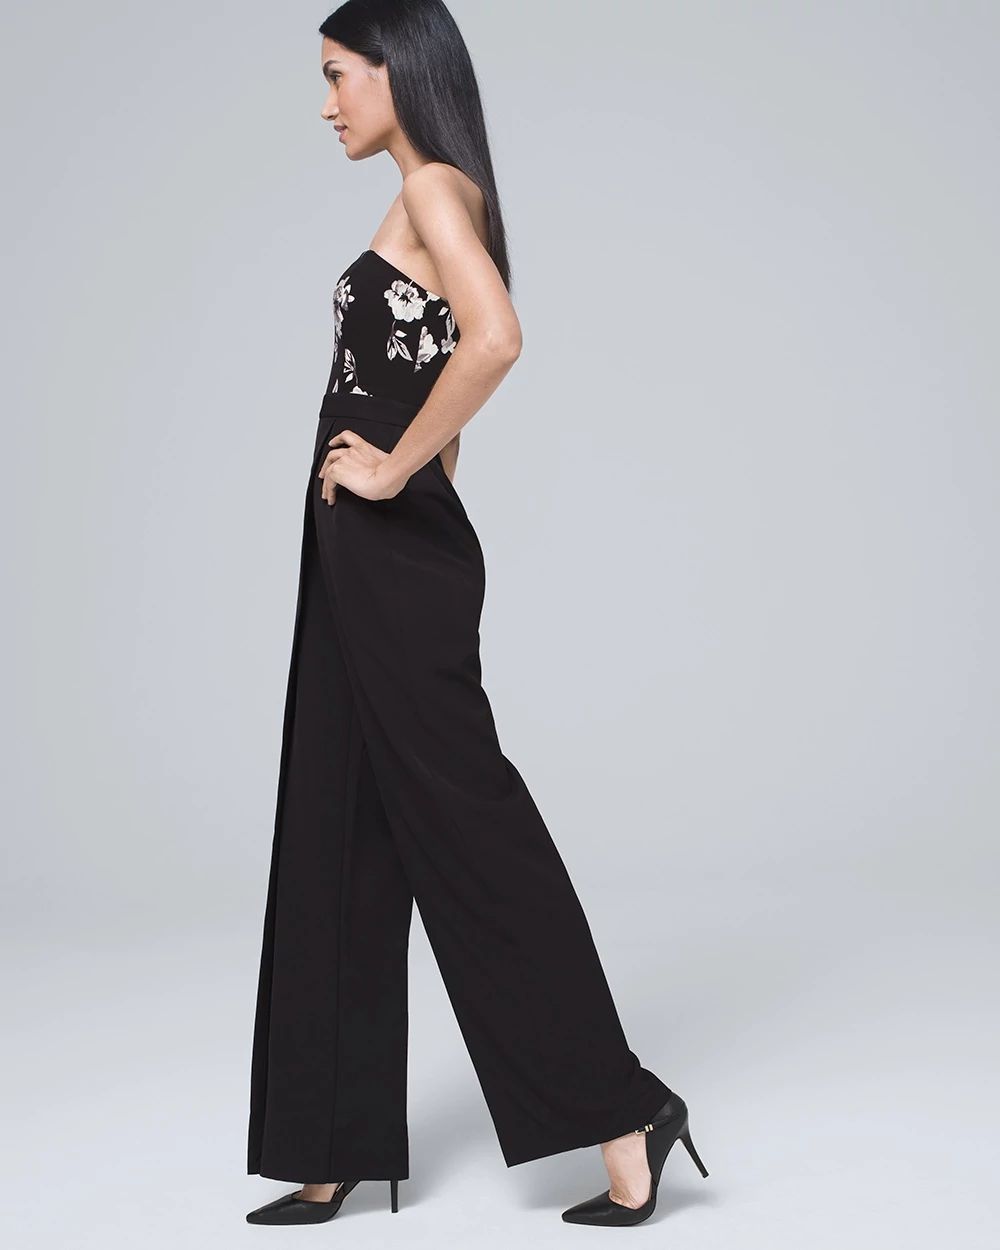 Convertible Floral-Bodice Jumpsuit click to view larger image.